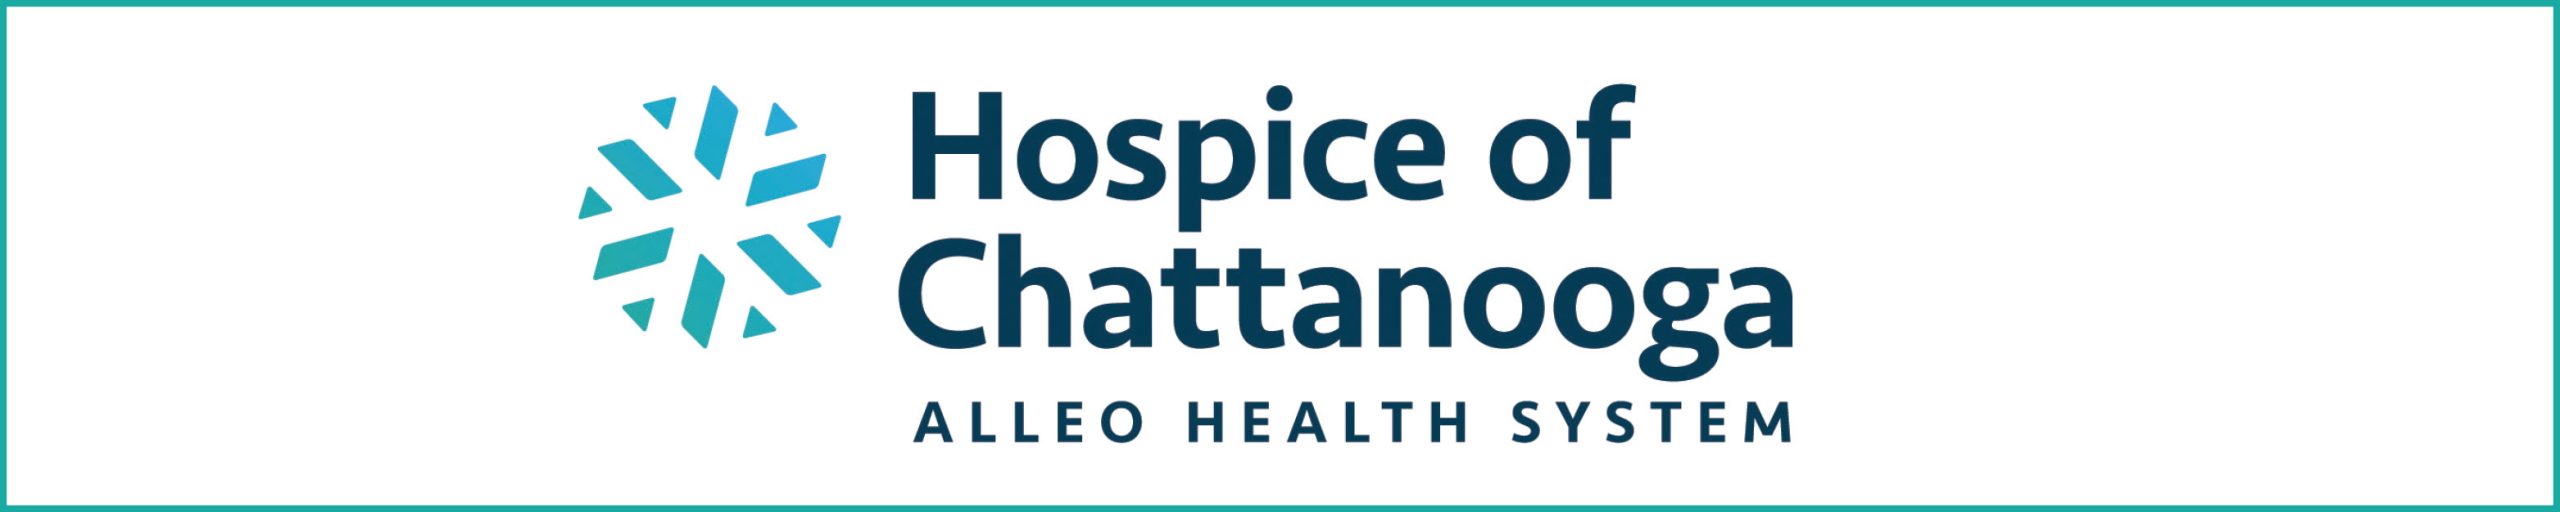 Hospice of Chattanooga Alleo Health System ad